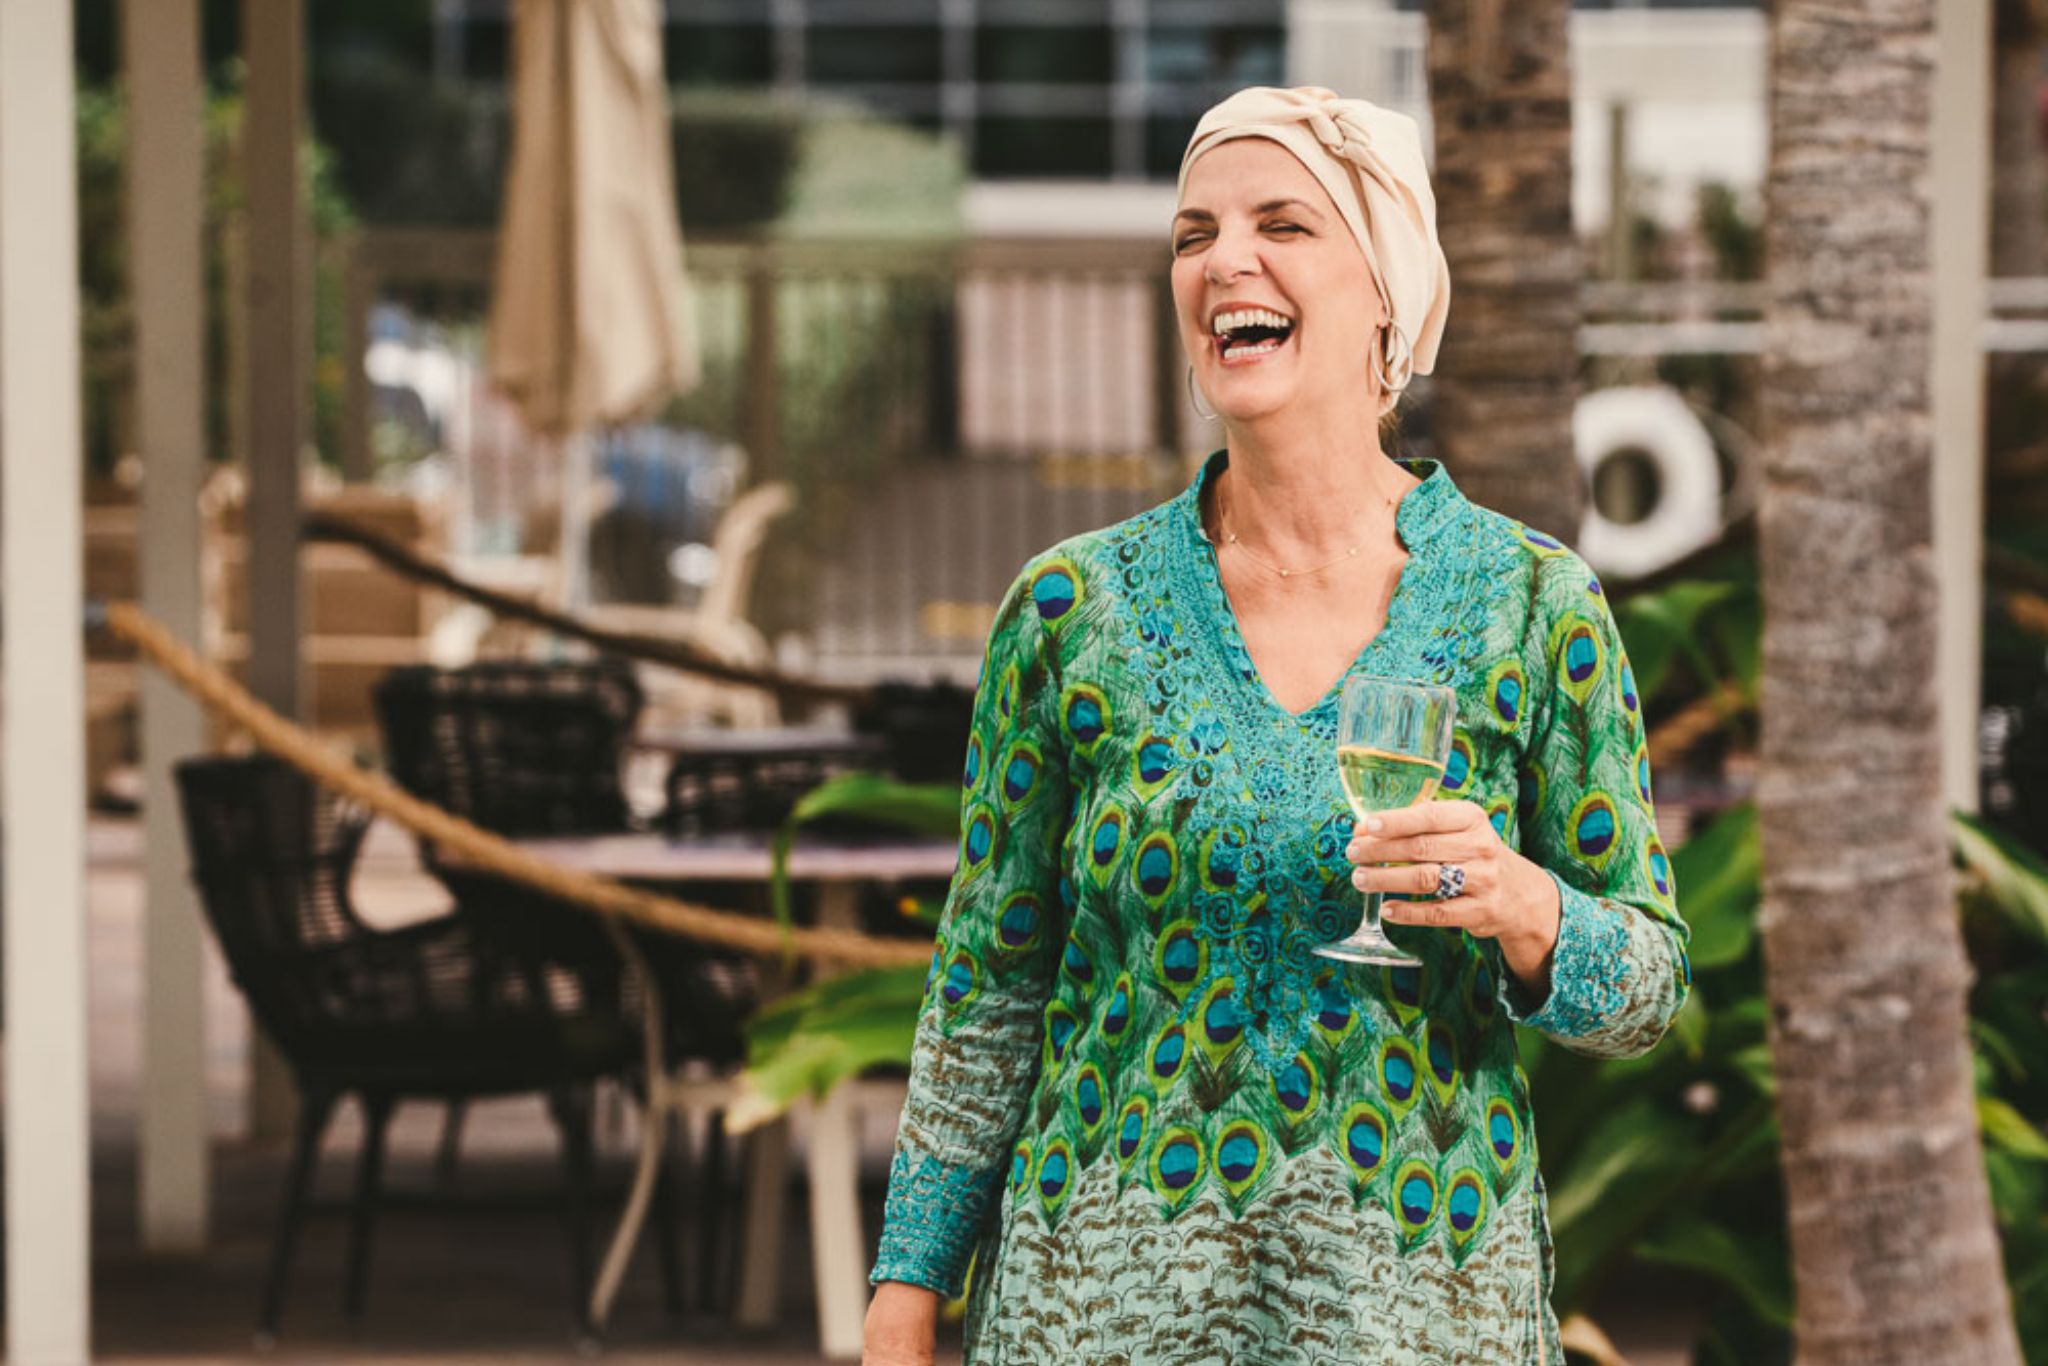 Woman wearing a peacock patterned outfit holding a glass of wine laughing